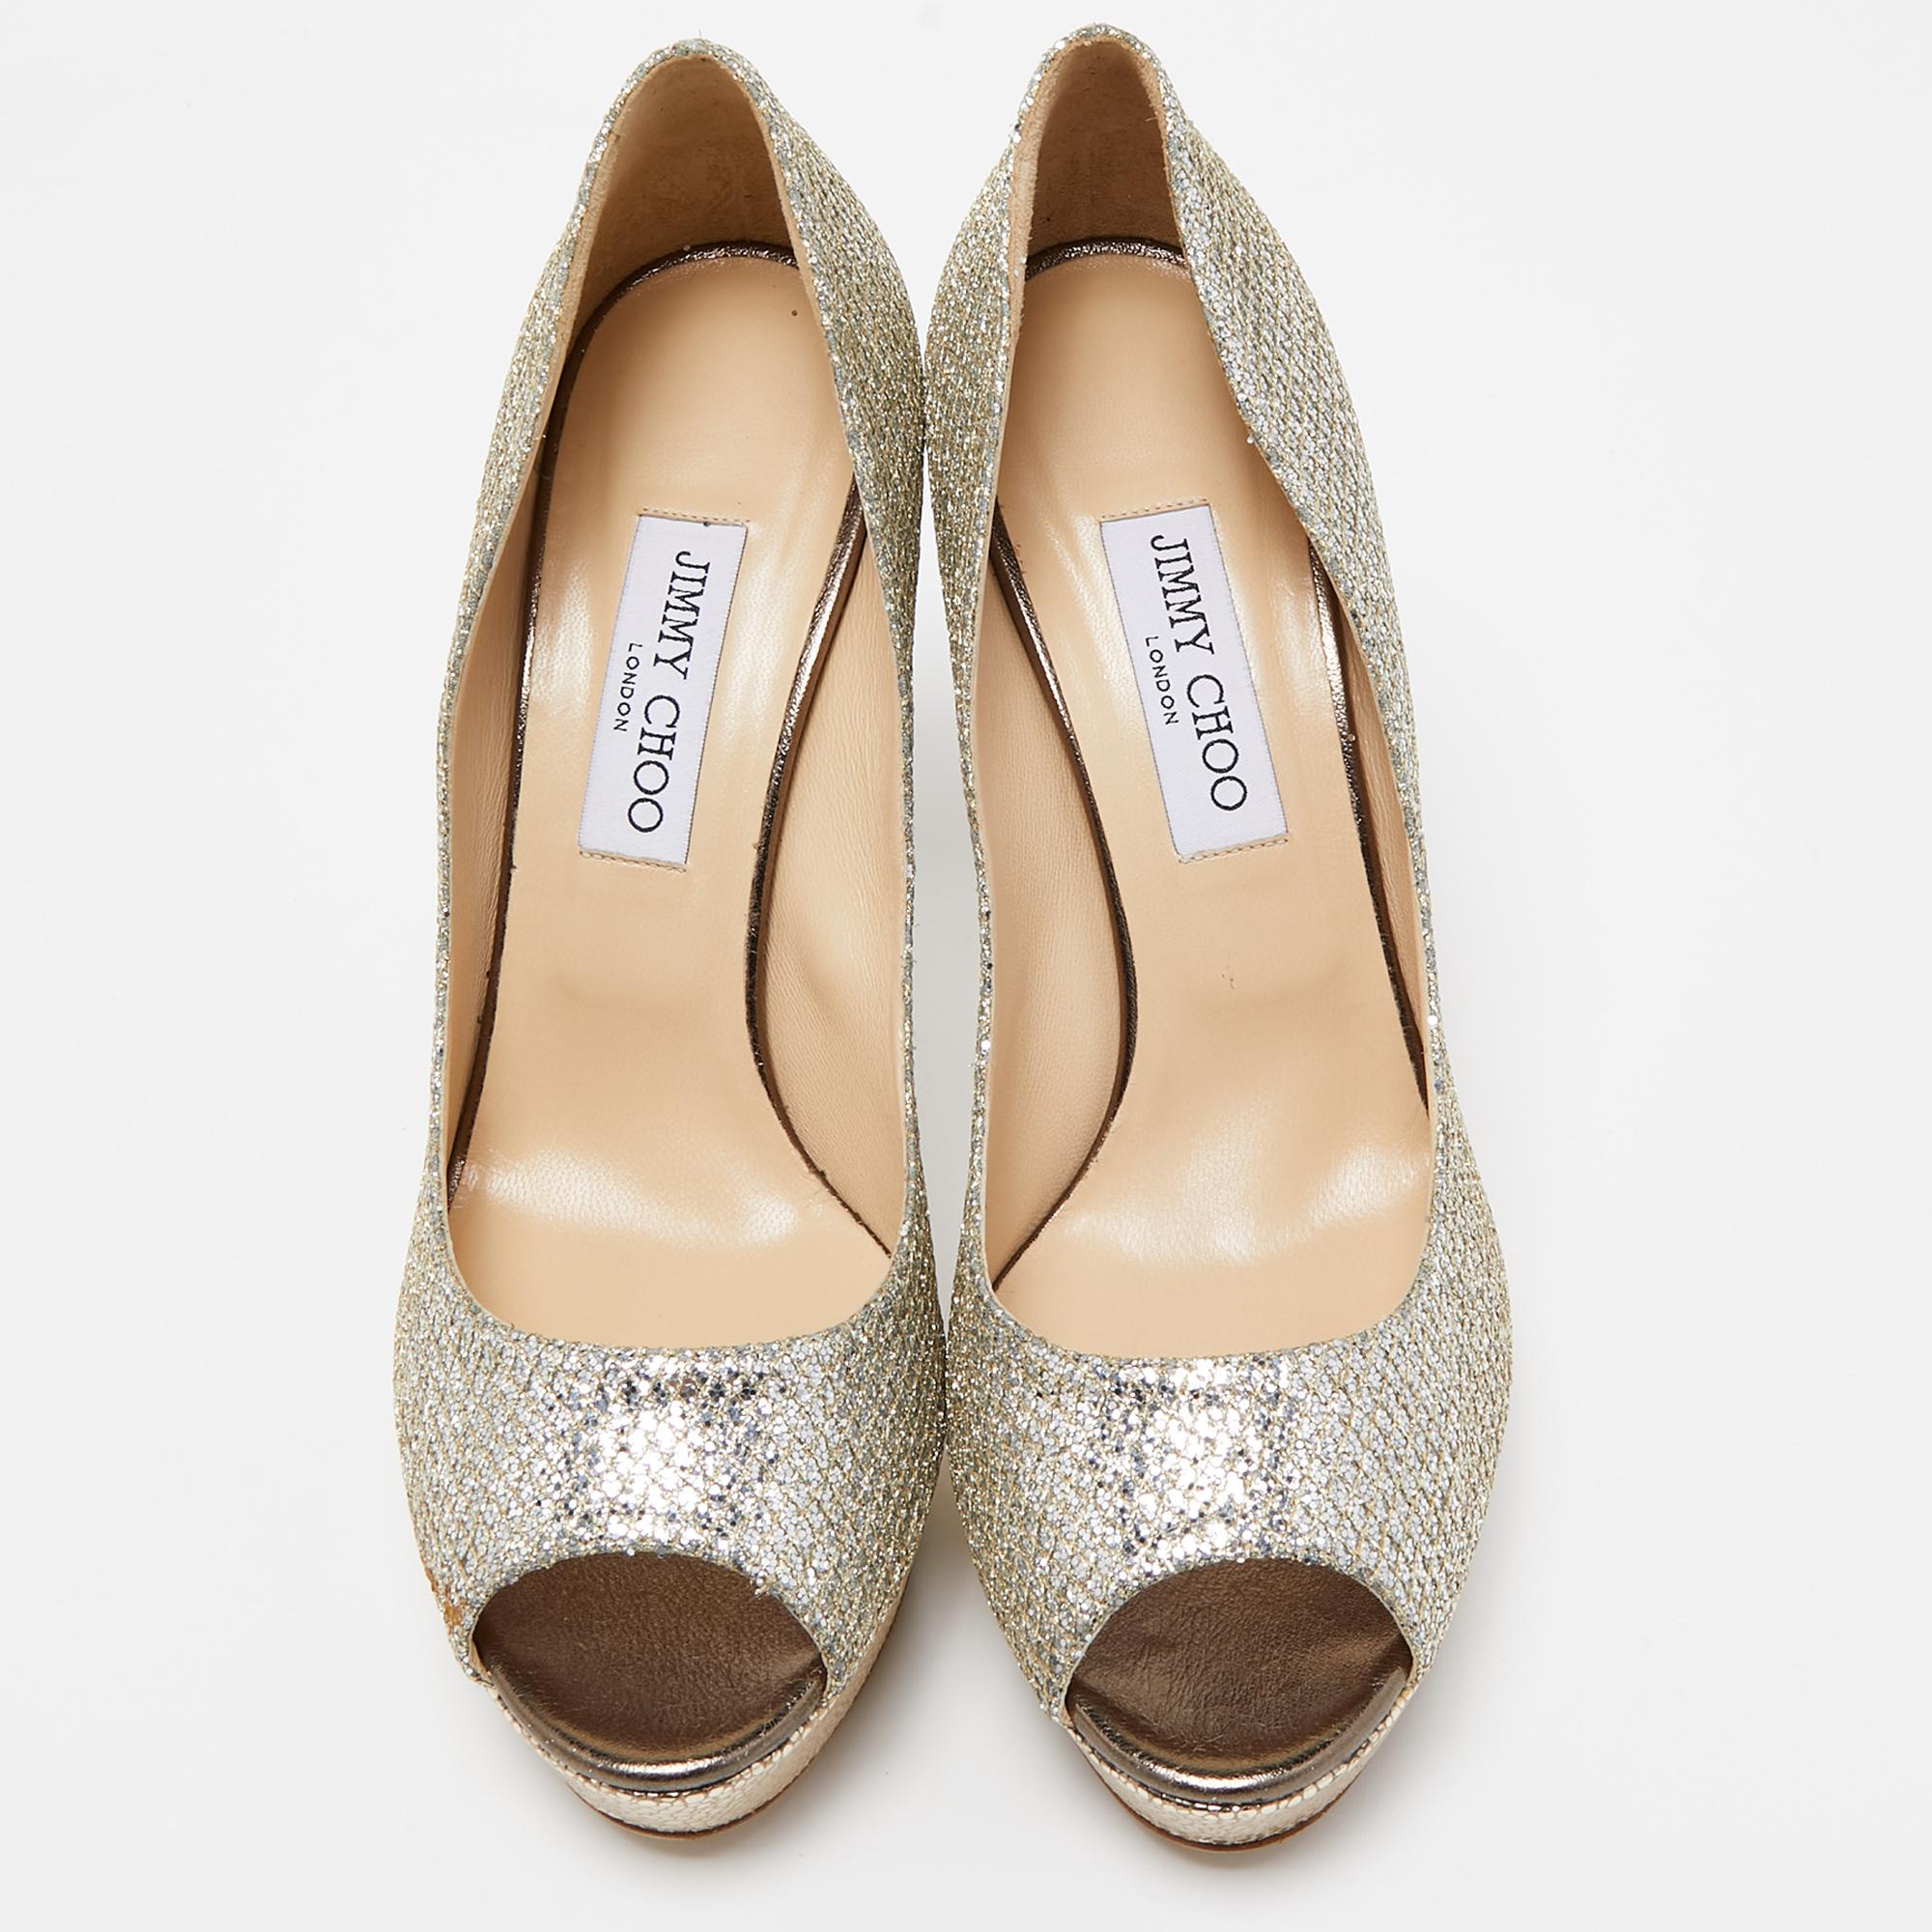 Crafted in a classy hue, we love these Jimmy Choo pumps. Designed to make a statement, they have a sleek silhouette and a nice fit. Wear yours under maxi skirts for a peek of glamour, or let them shine with cropped hemlines.

Includes: Original Box

